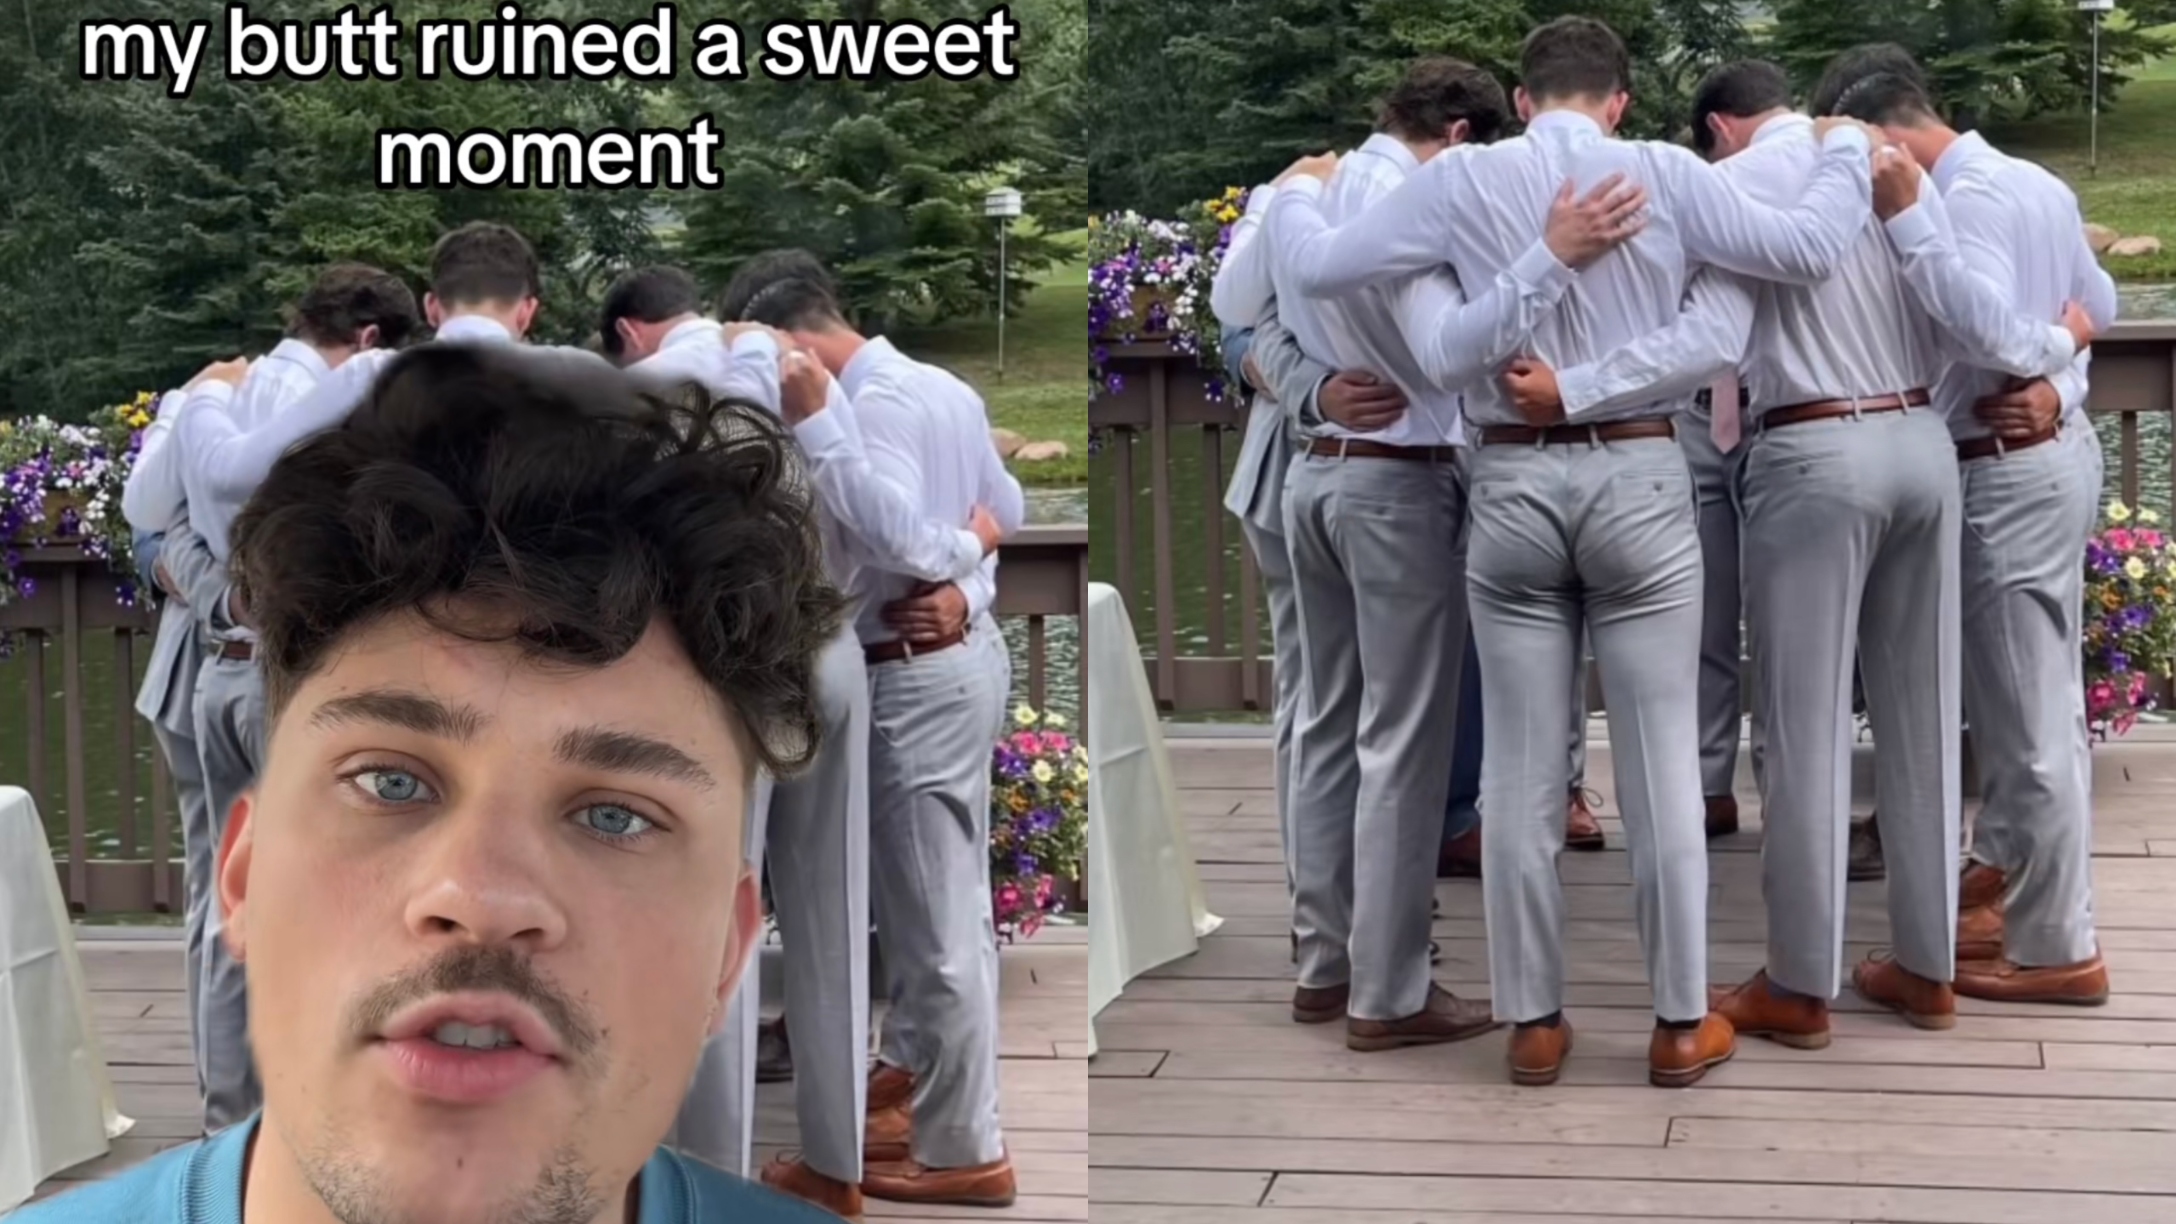 I Ruined A Beautiful Photo From My Friend's Wedding With My Now-Viral Epic Wedgie